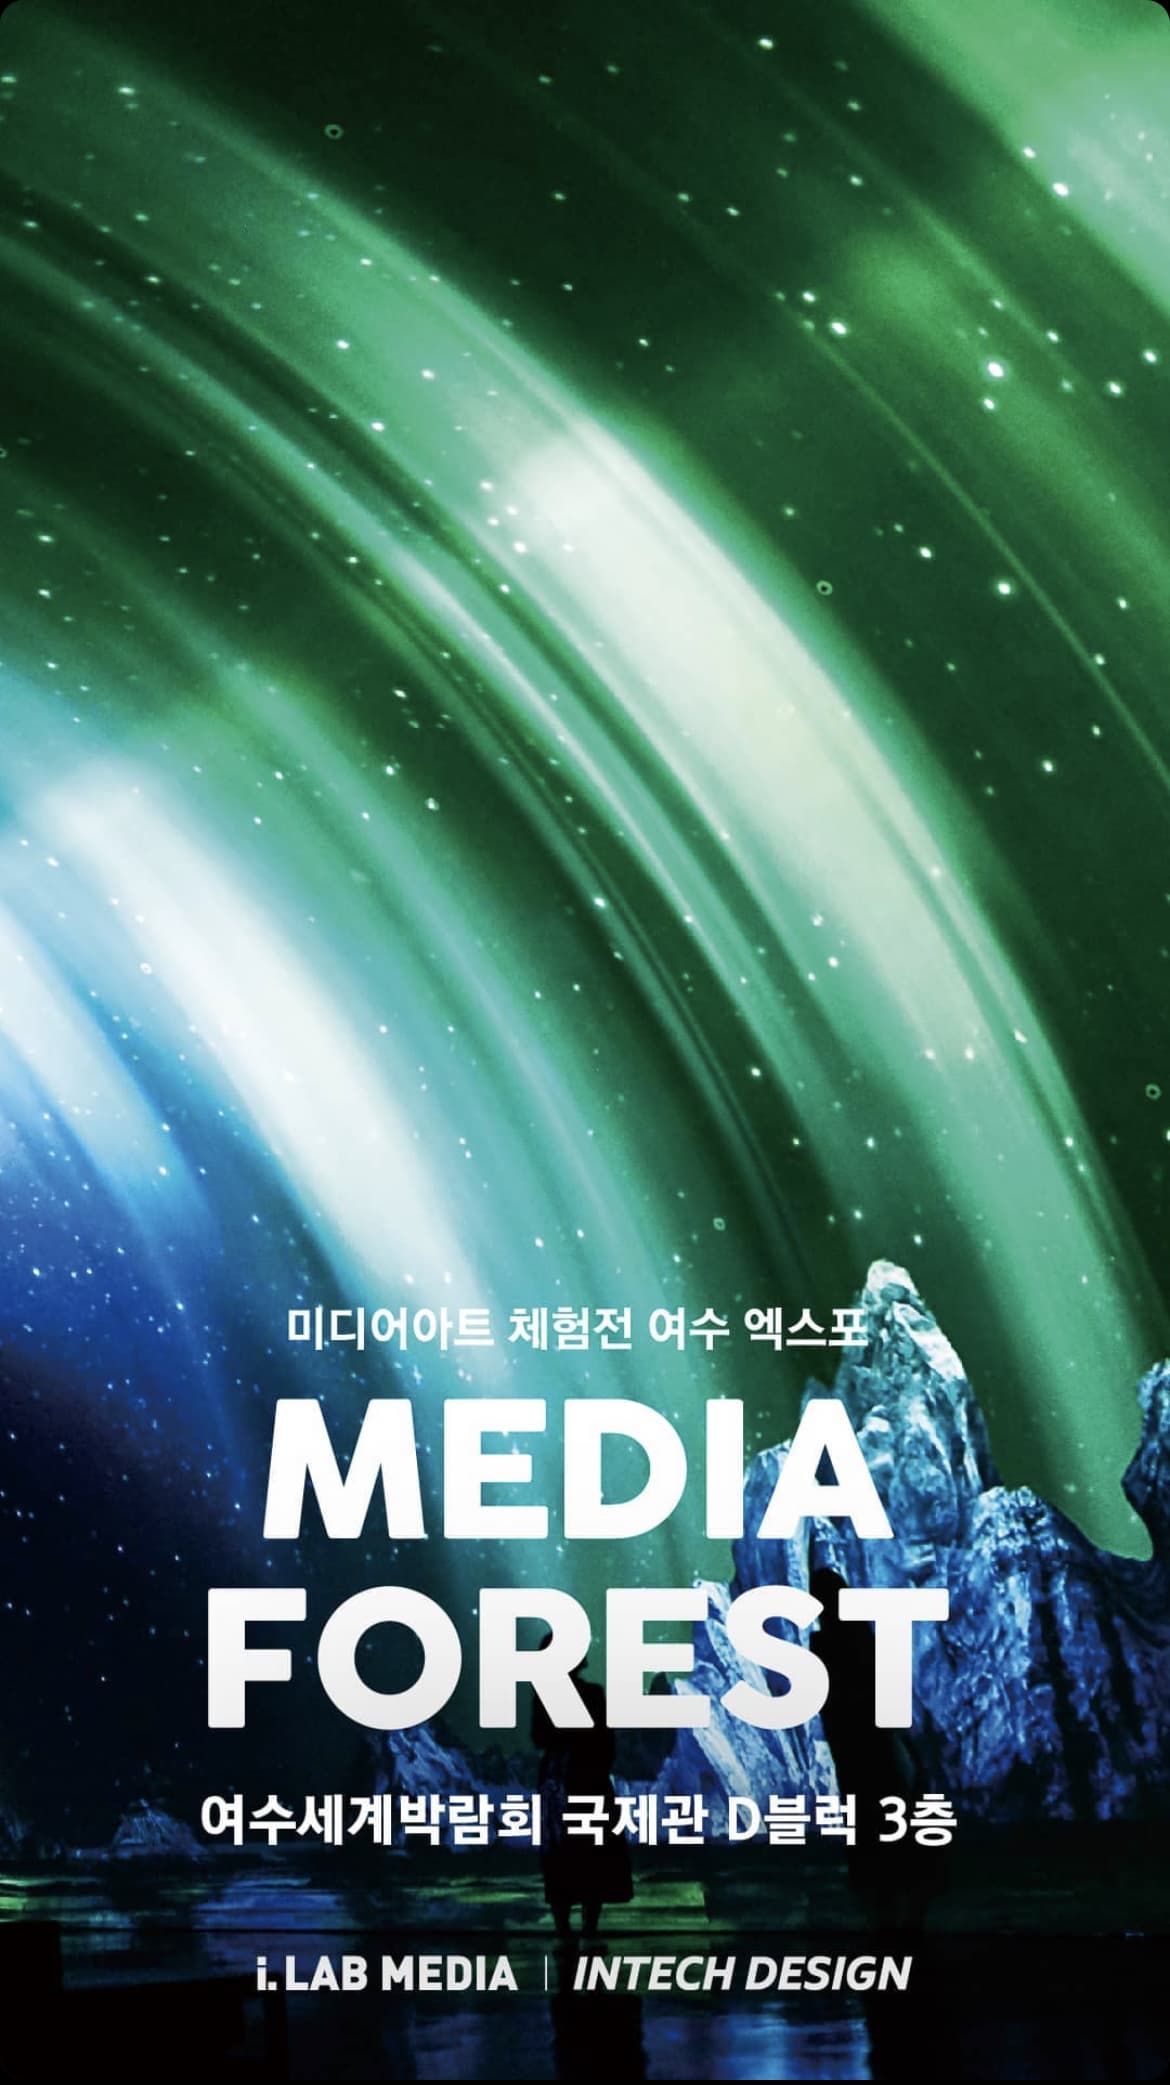 MEDIA FOREST